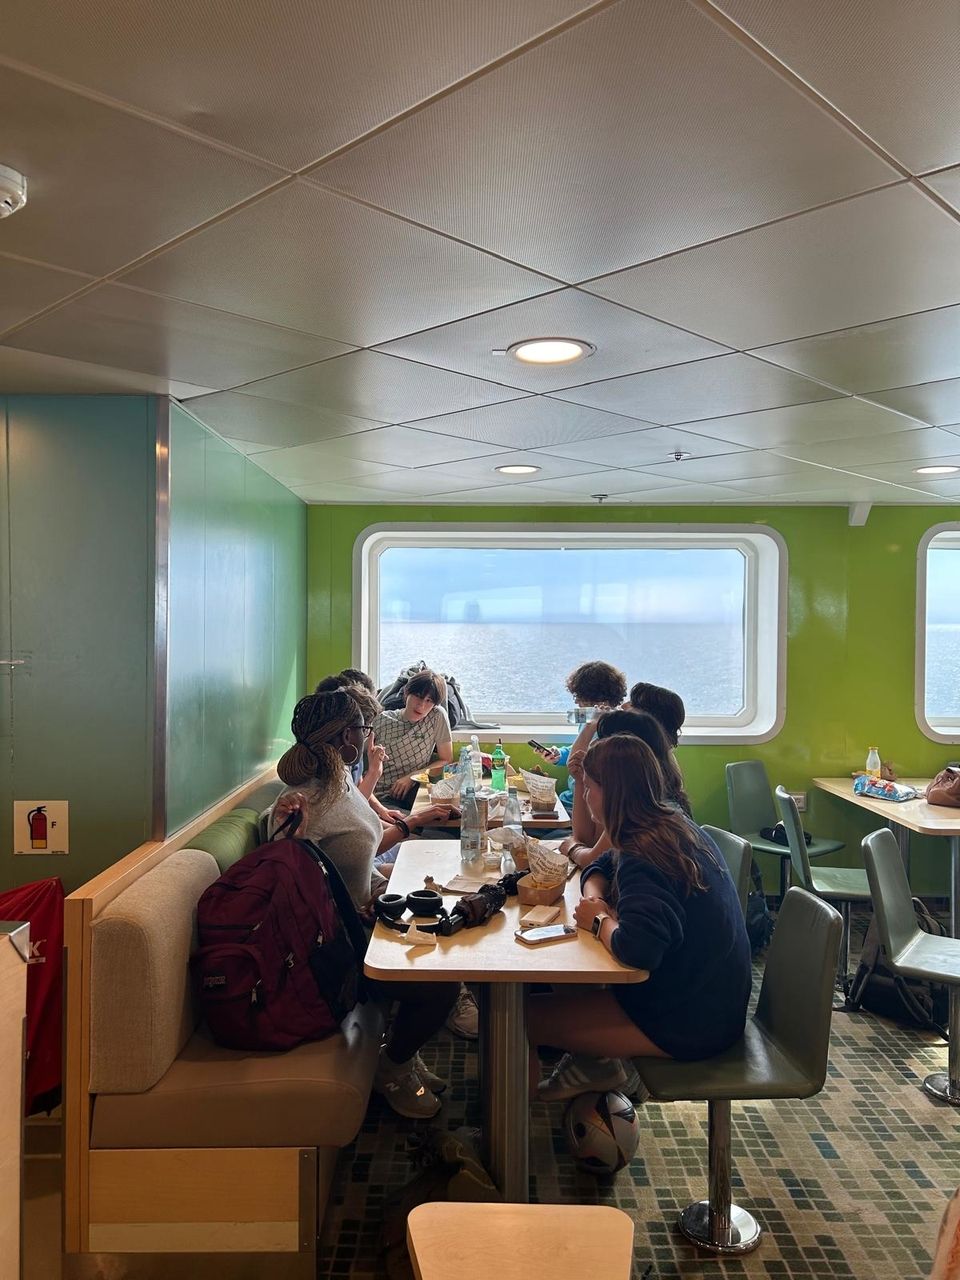 Students enjoying food and conversation on the ferry.